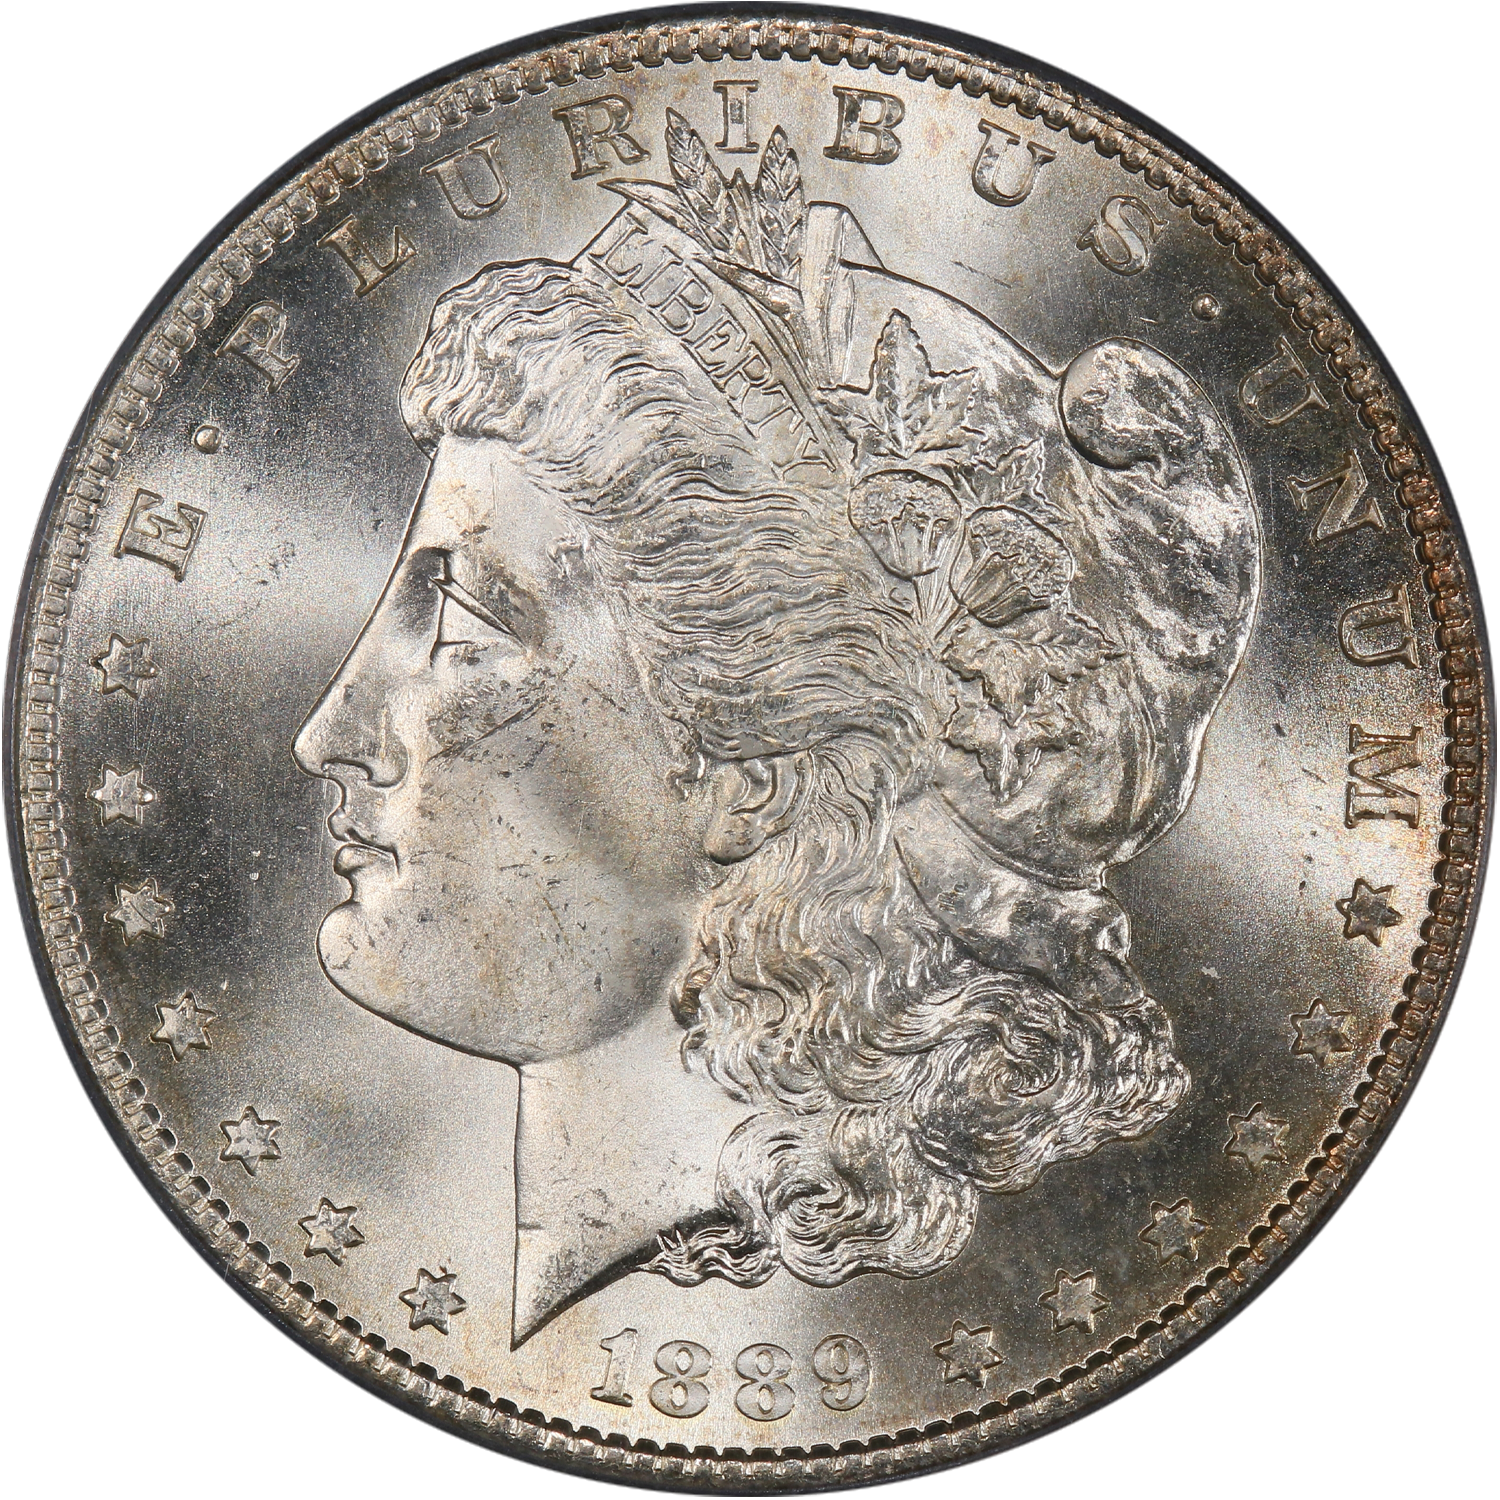 1889 s mint morgan dollar price guide value